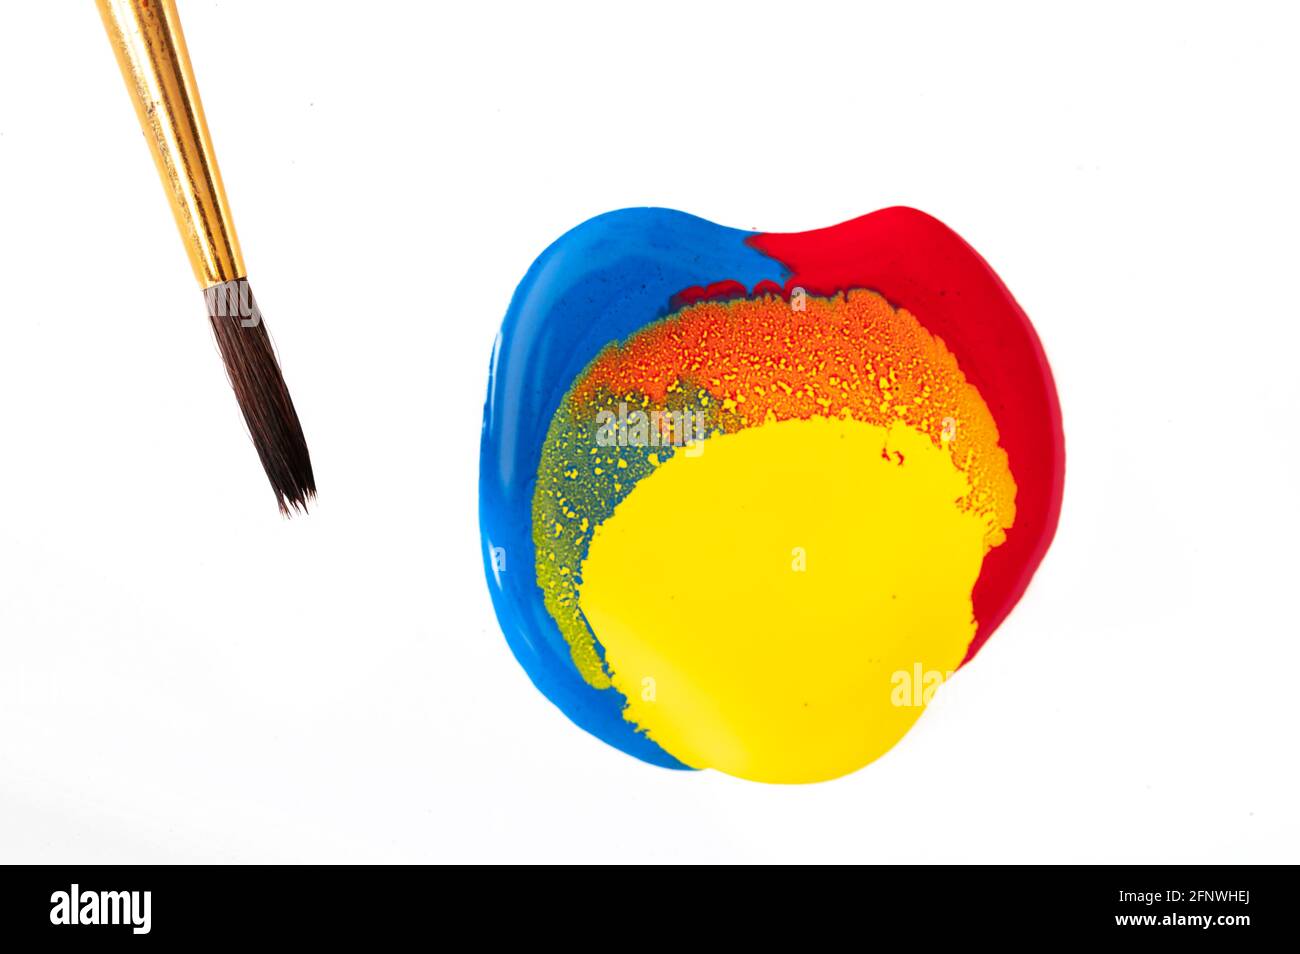 Red, yellow, and blue paint with clean paintbrush on the side Stock Photo